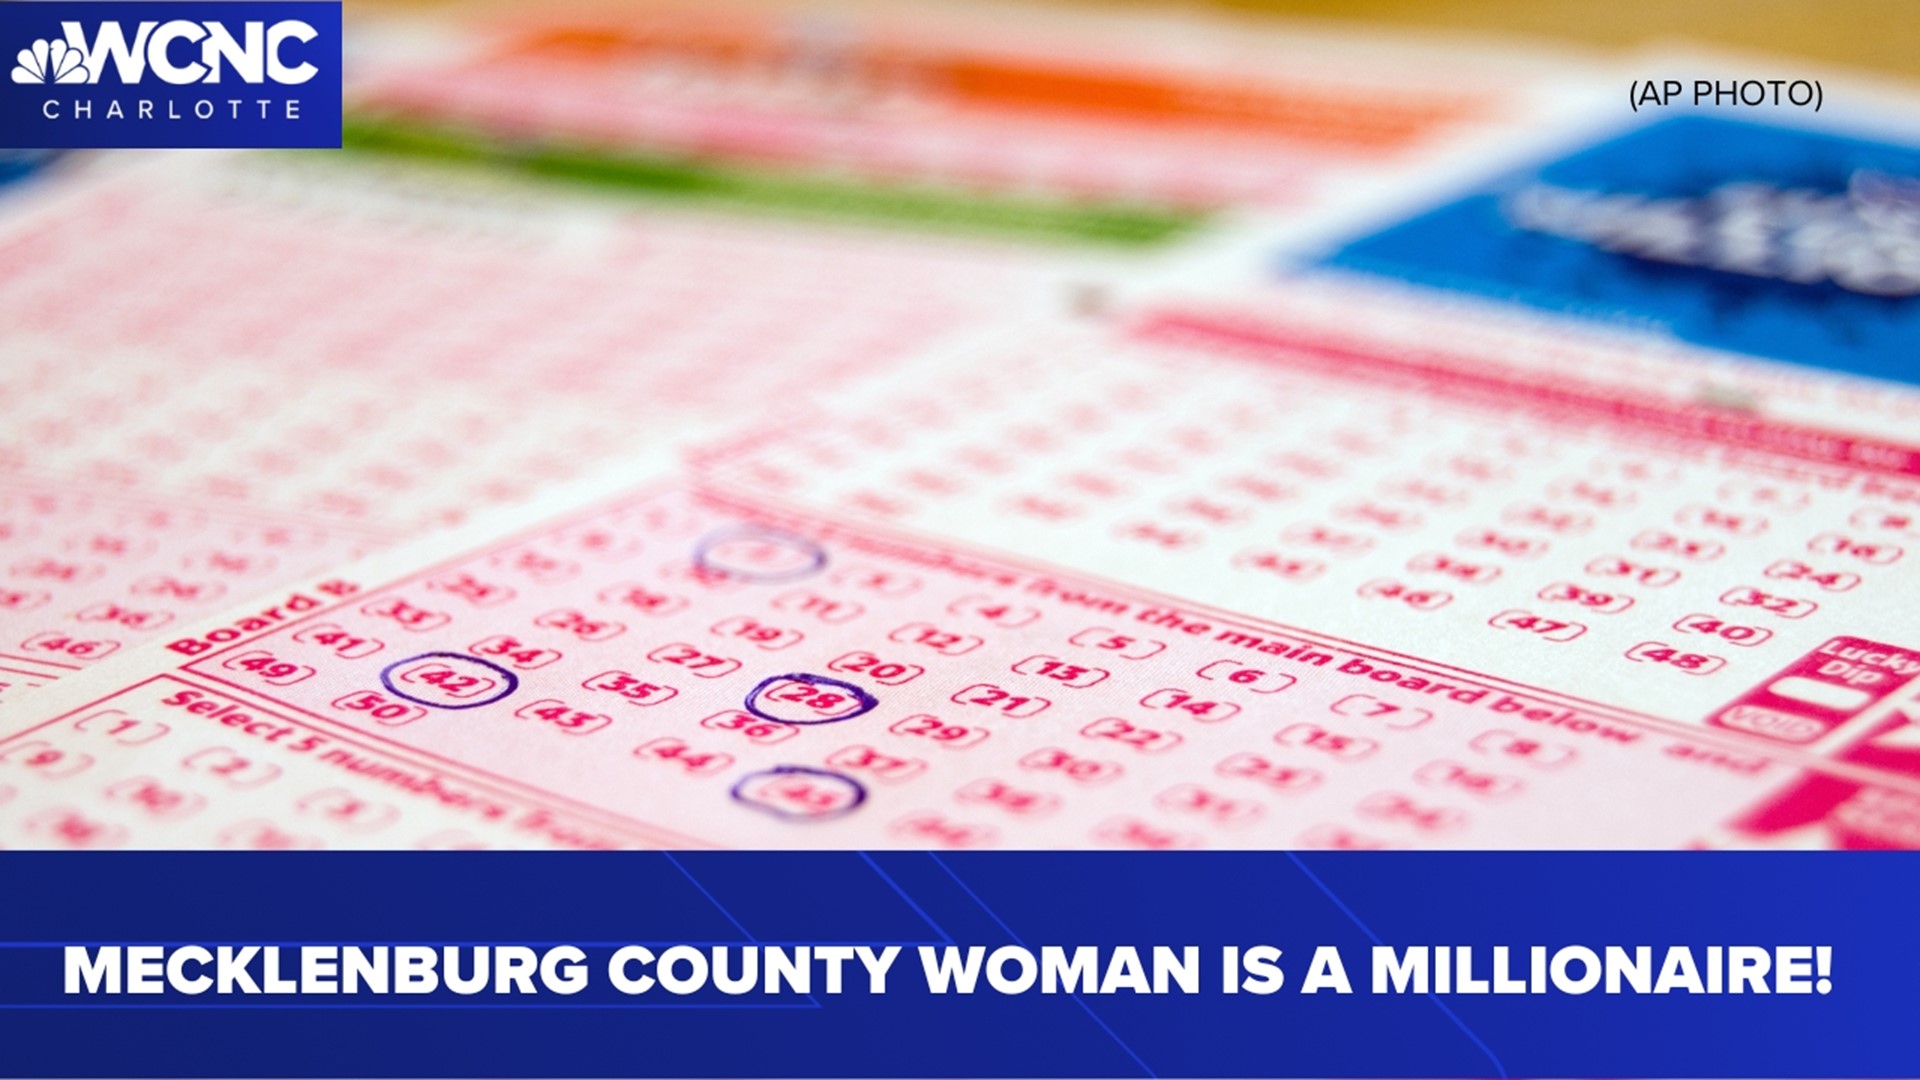 A woman here in Mecklenburg County got a big pay day.